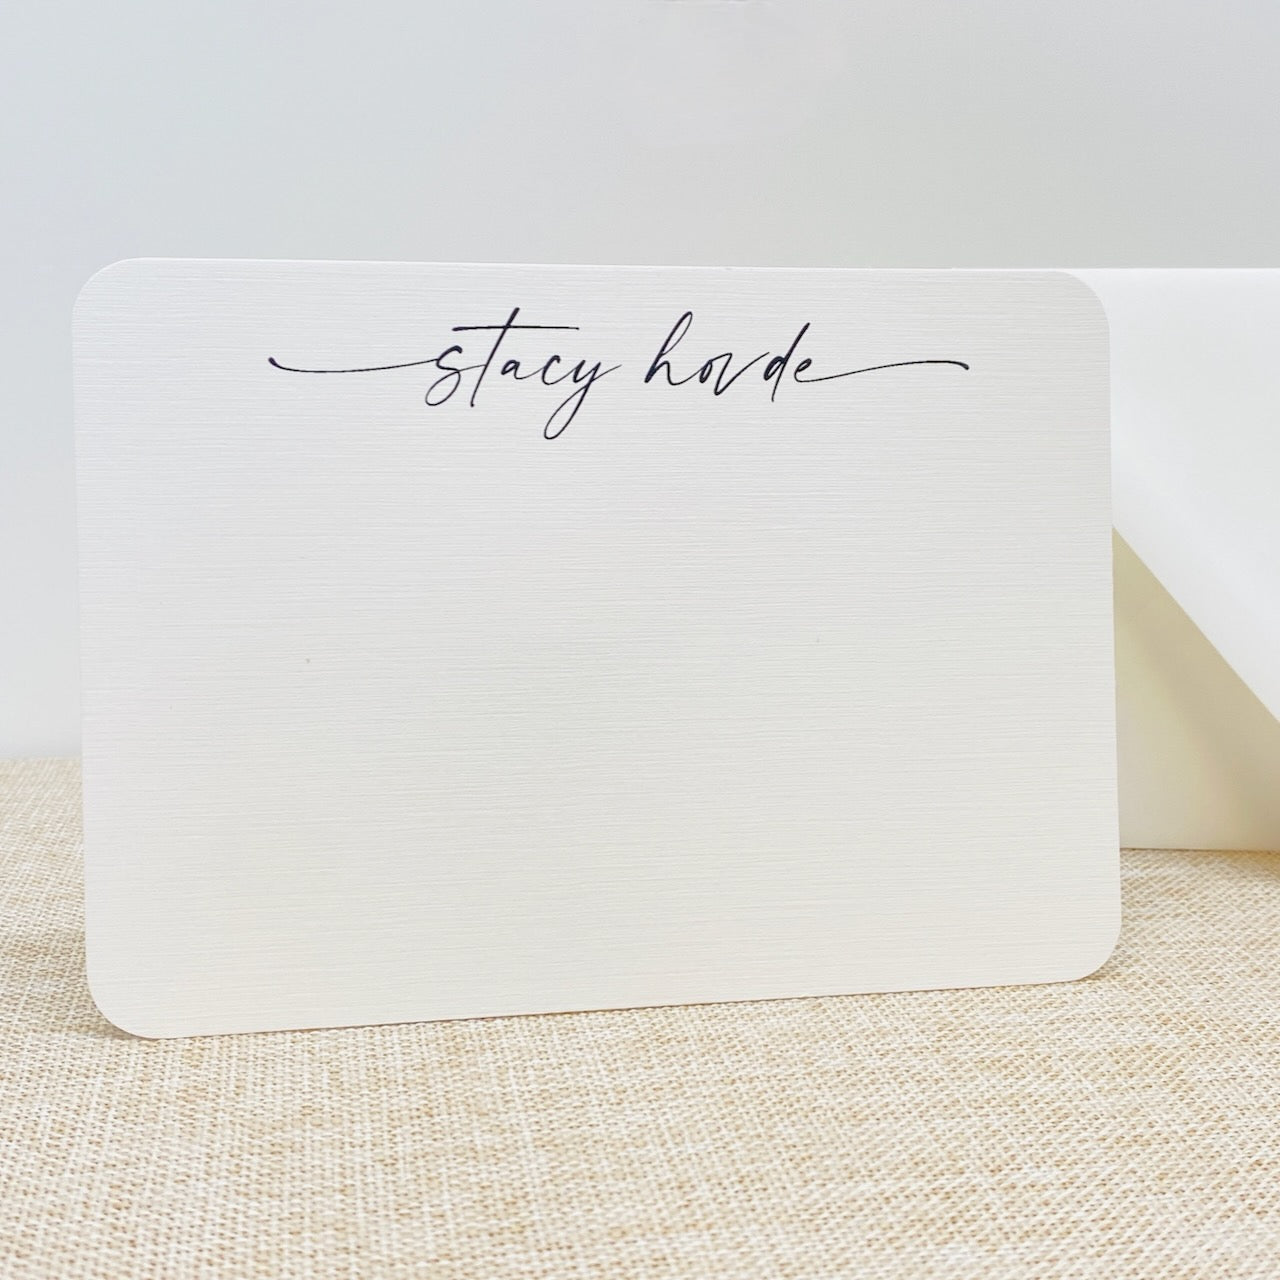 Personalized Stationery Set, Calligraphy Script Note Cards, Set of 20